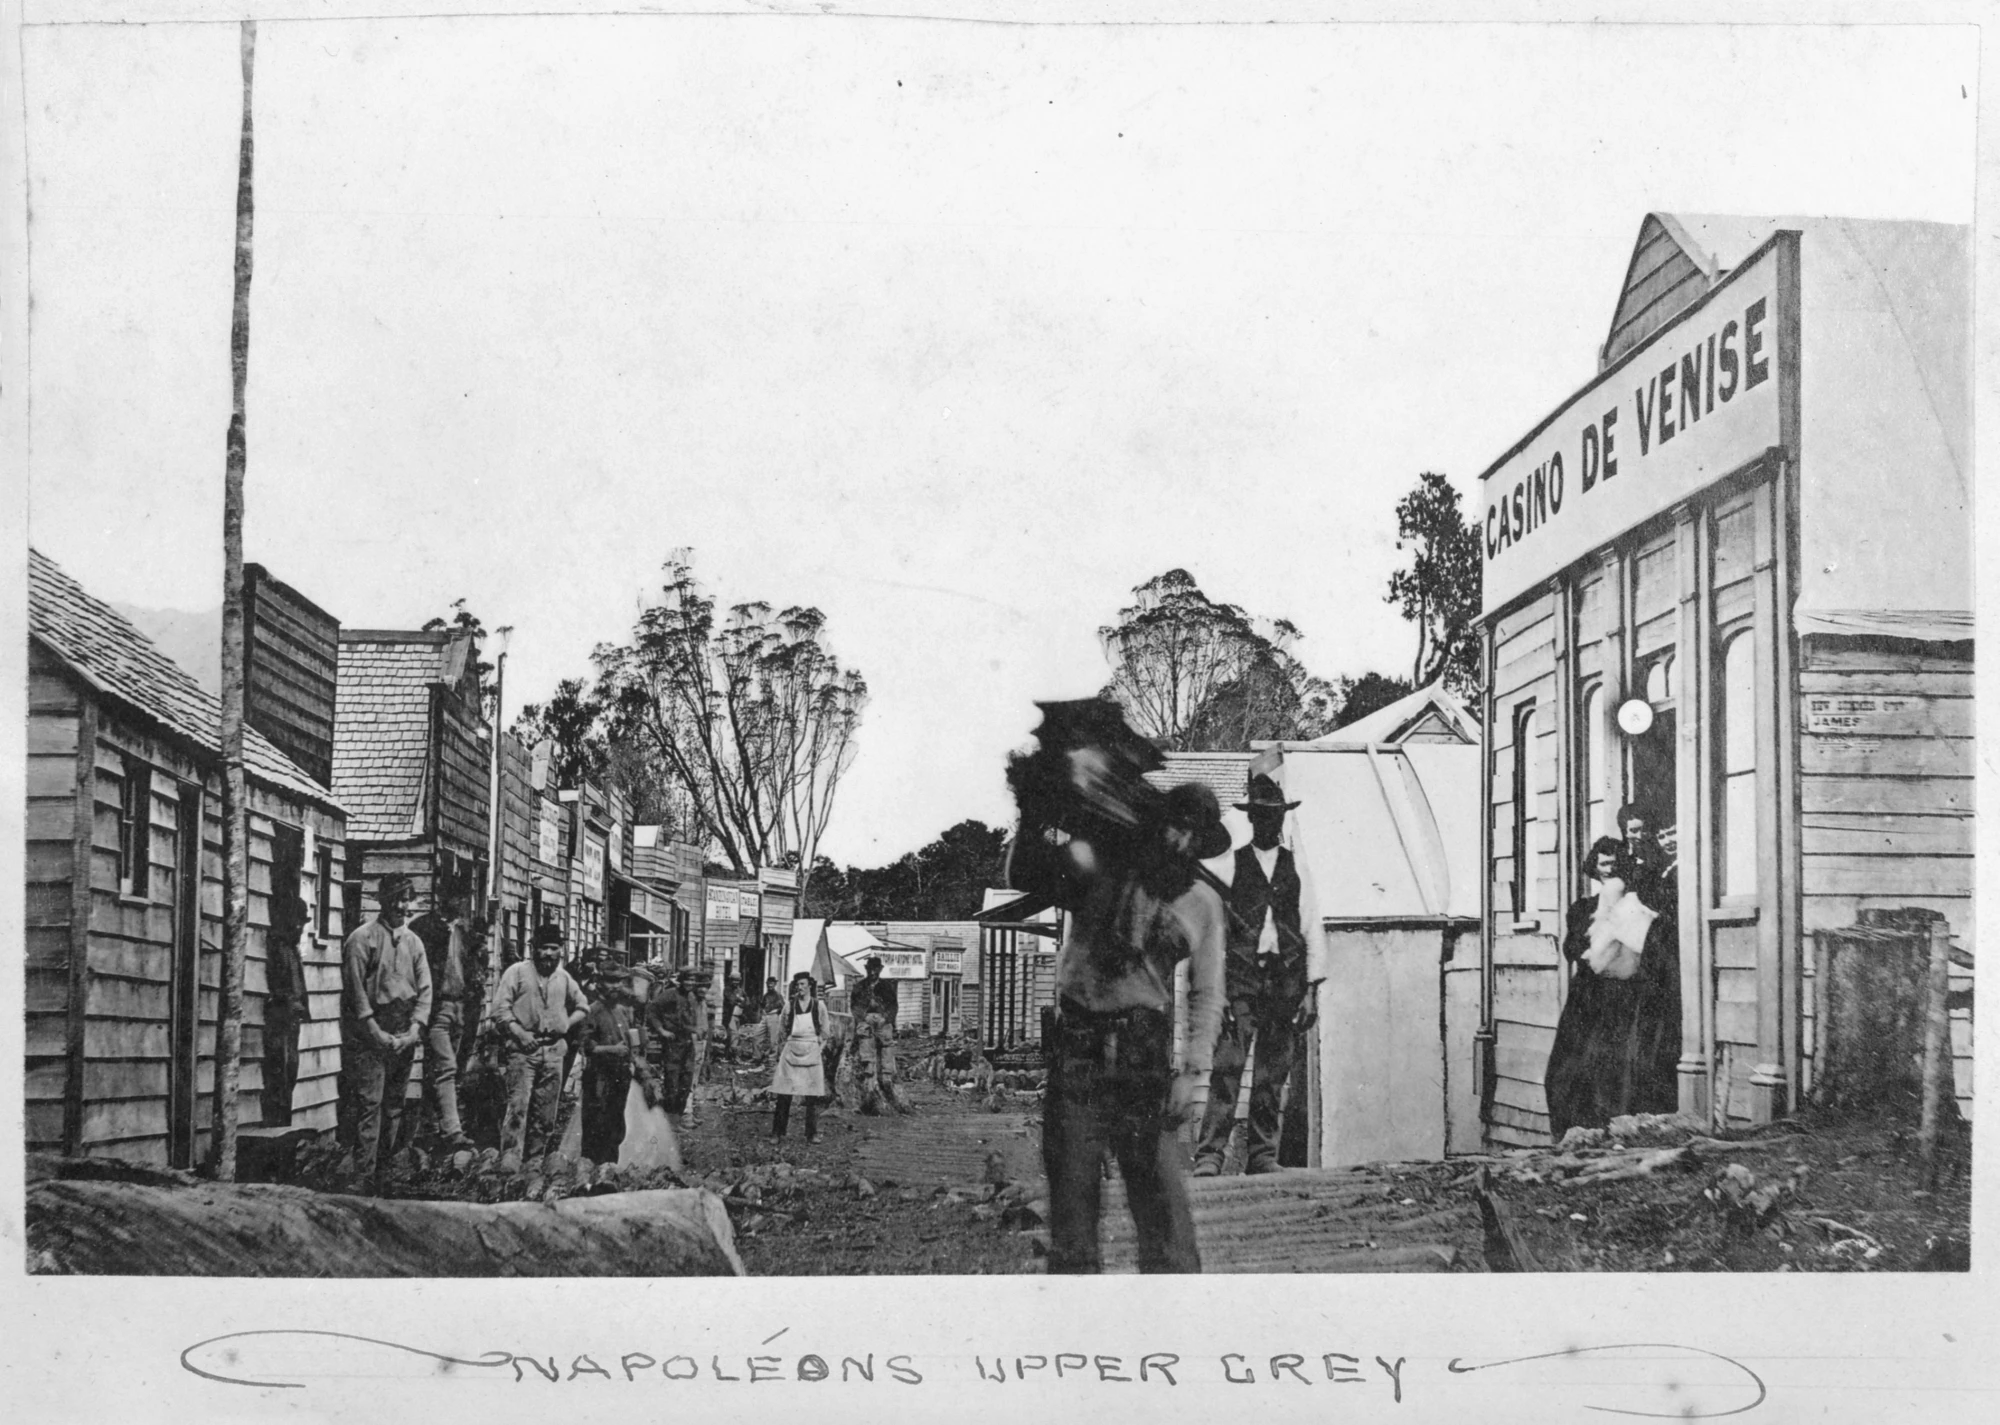 A street scene with men and women standing outside various buildings along a muddy street.